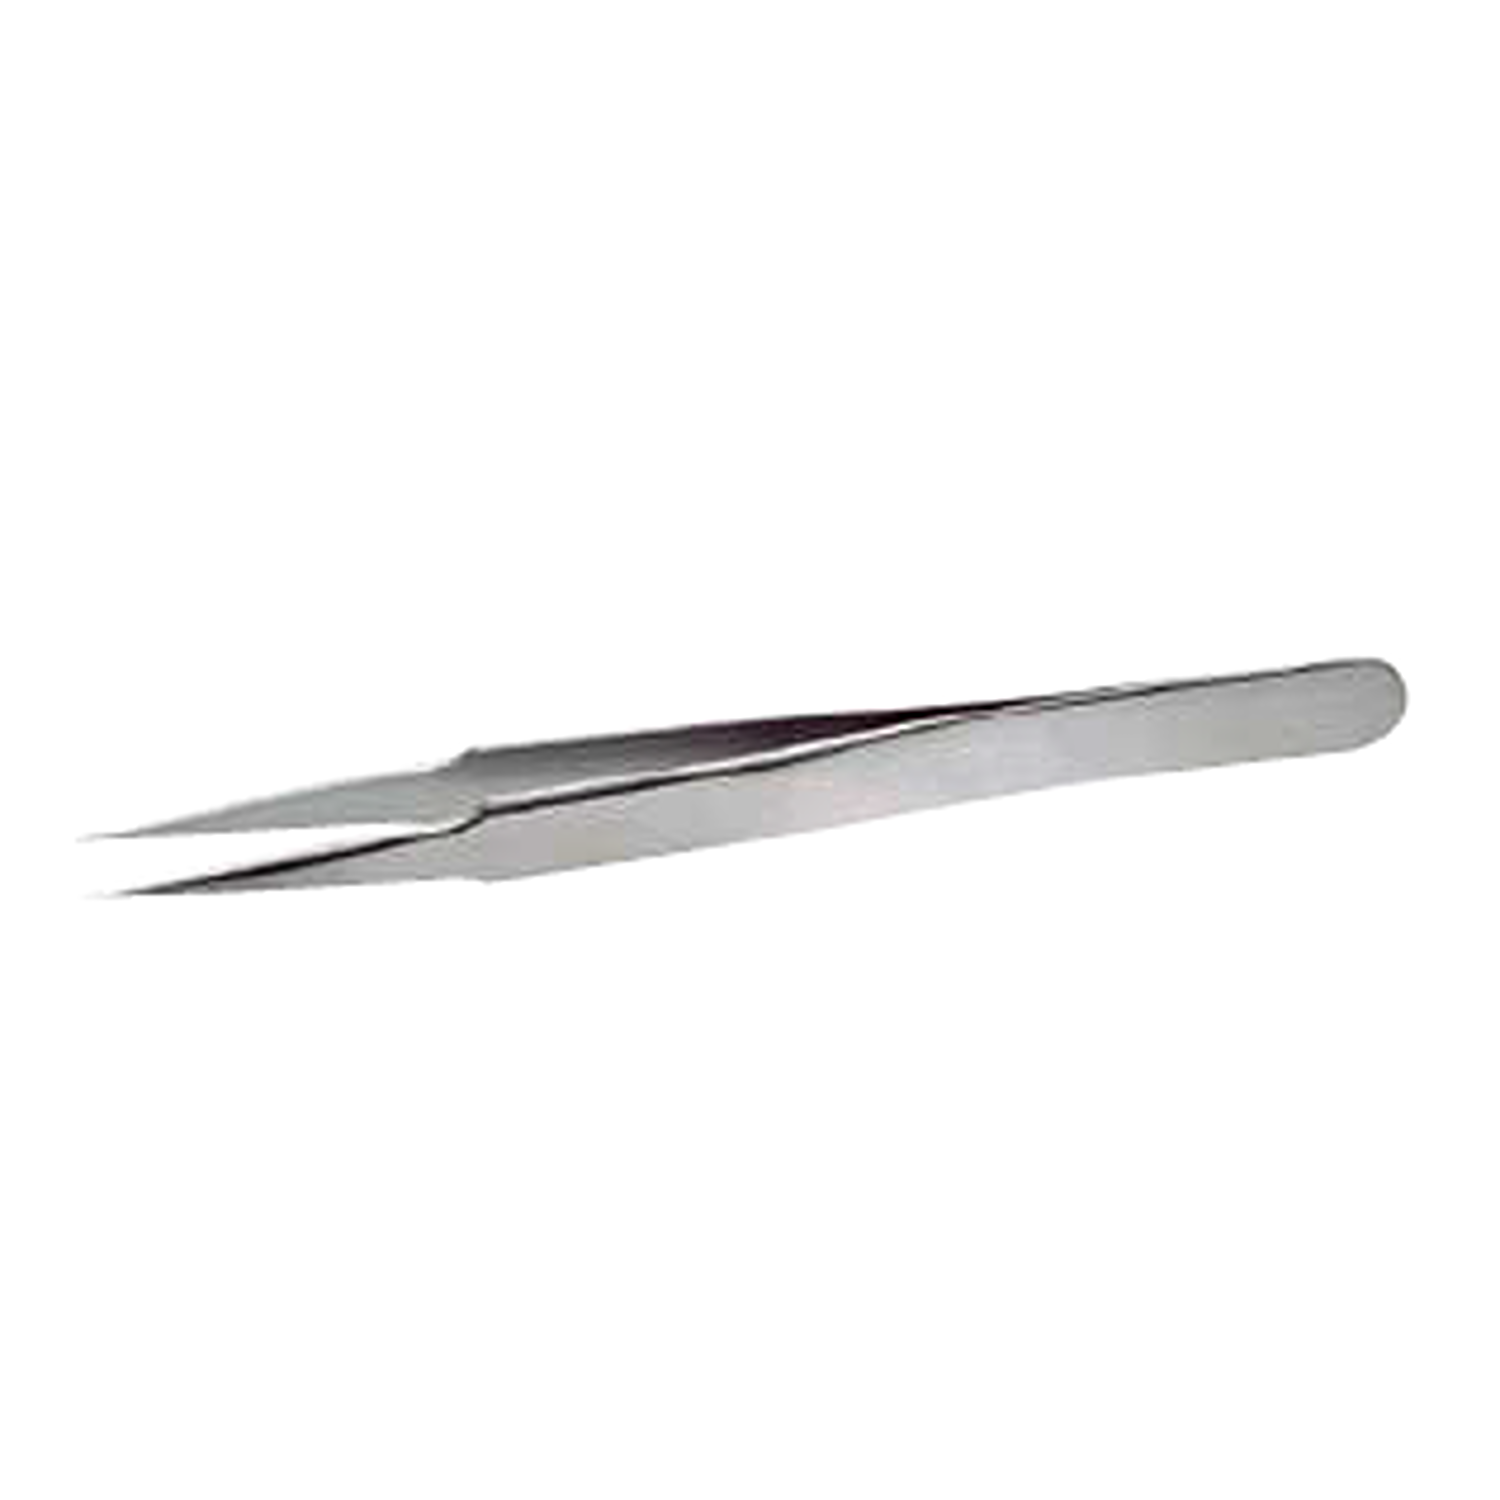 BAHCO TL 2-SA-SL Stainless Steel Precision Industrial Tweezers - Premium Tweezers from BAHCO - Shop now at Yew Aik.